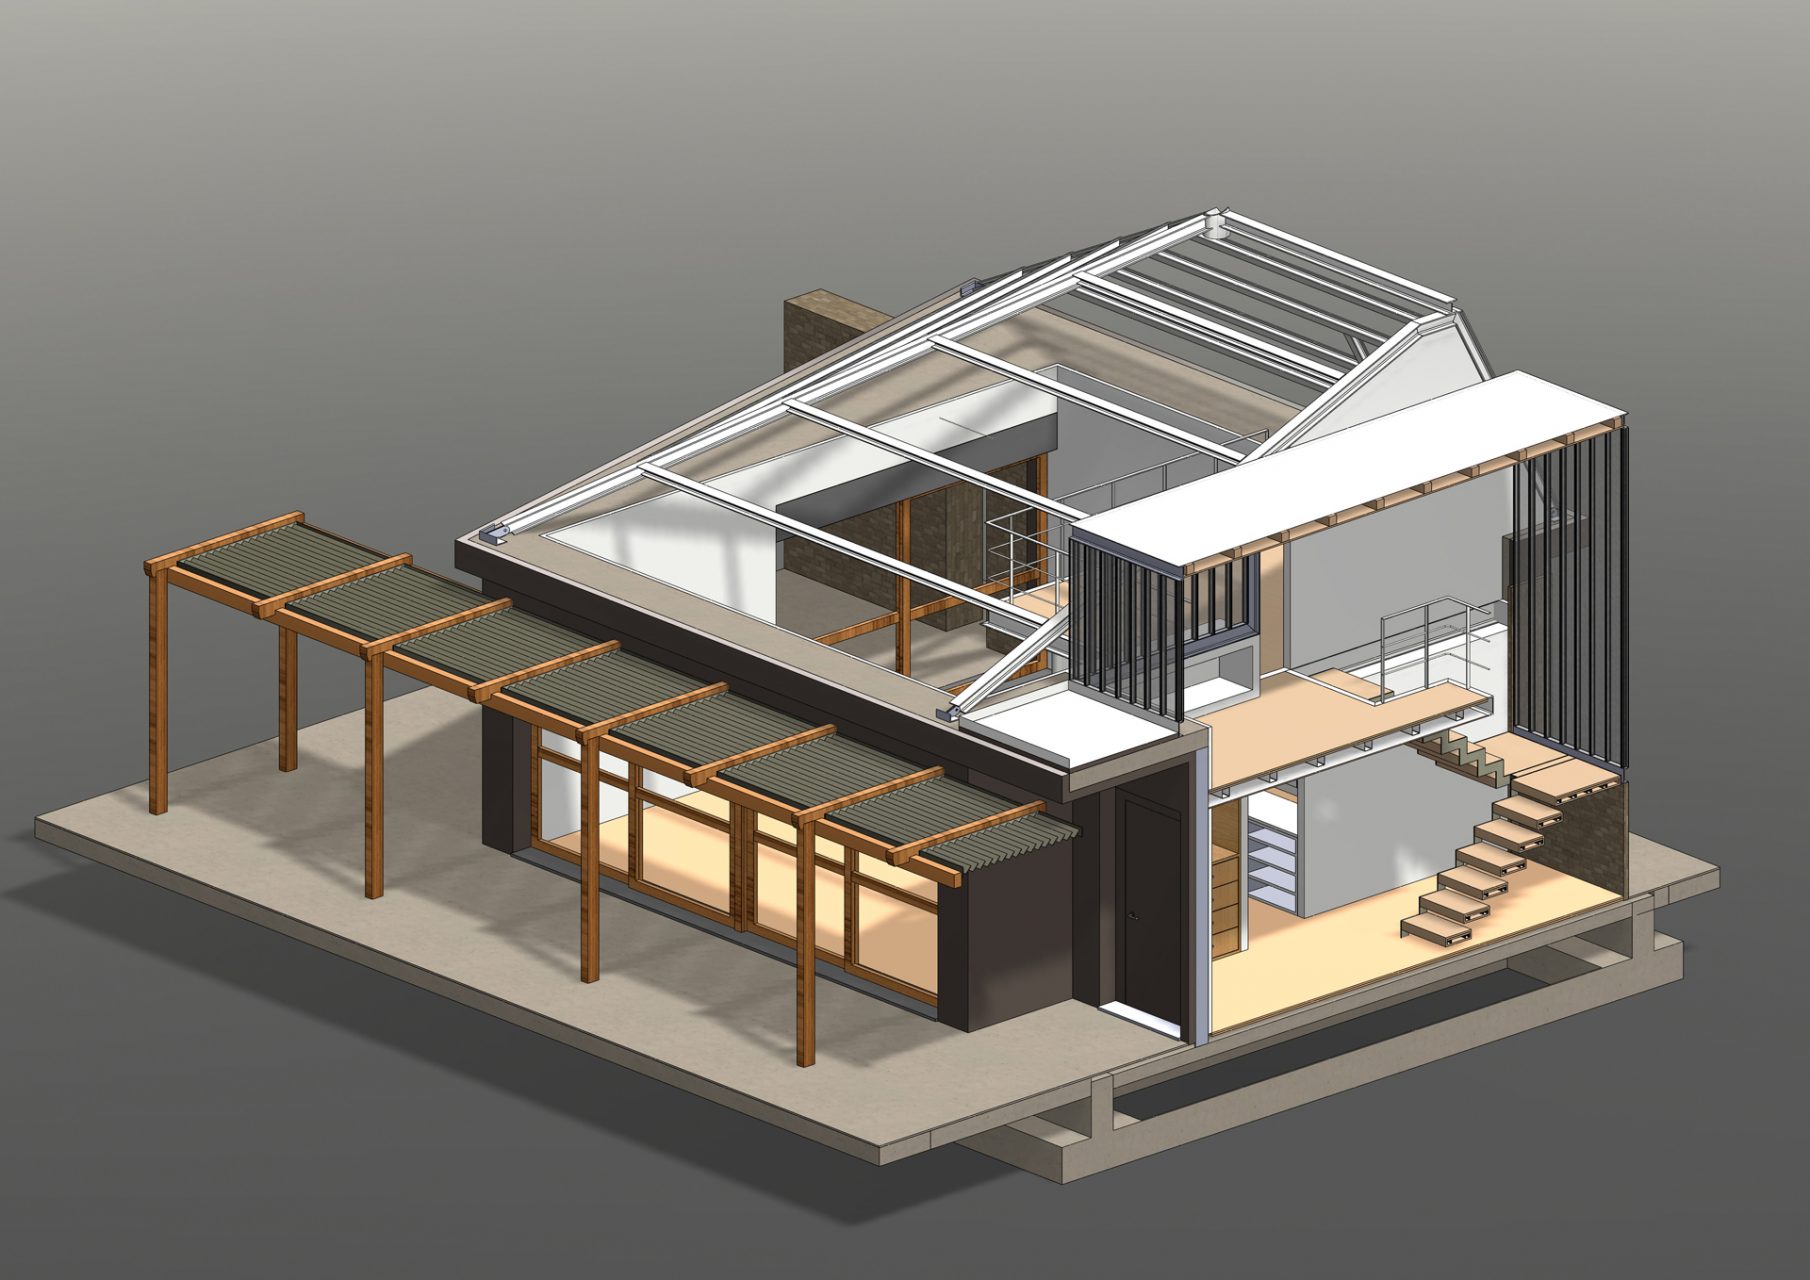 KL HOUSE 16 - axonometric section featuring & roof METAL STRUCTURE F